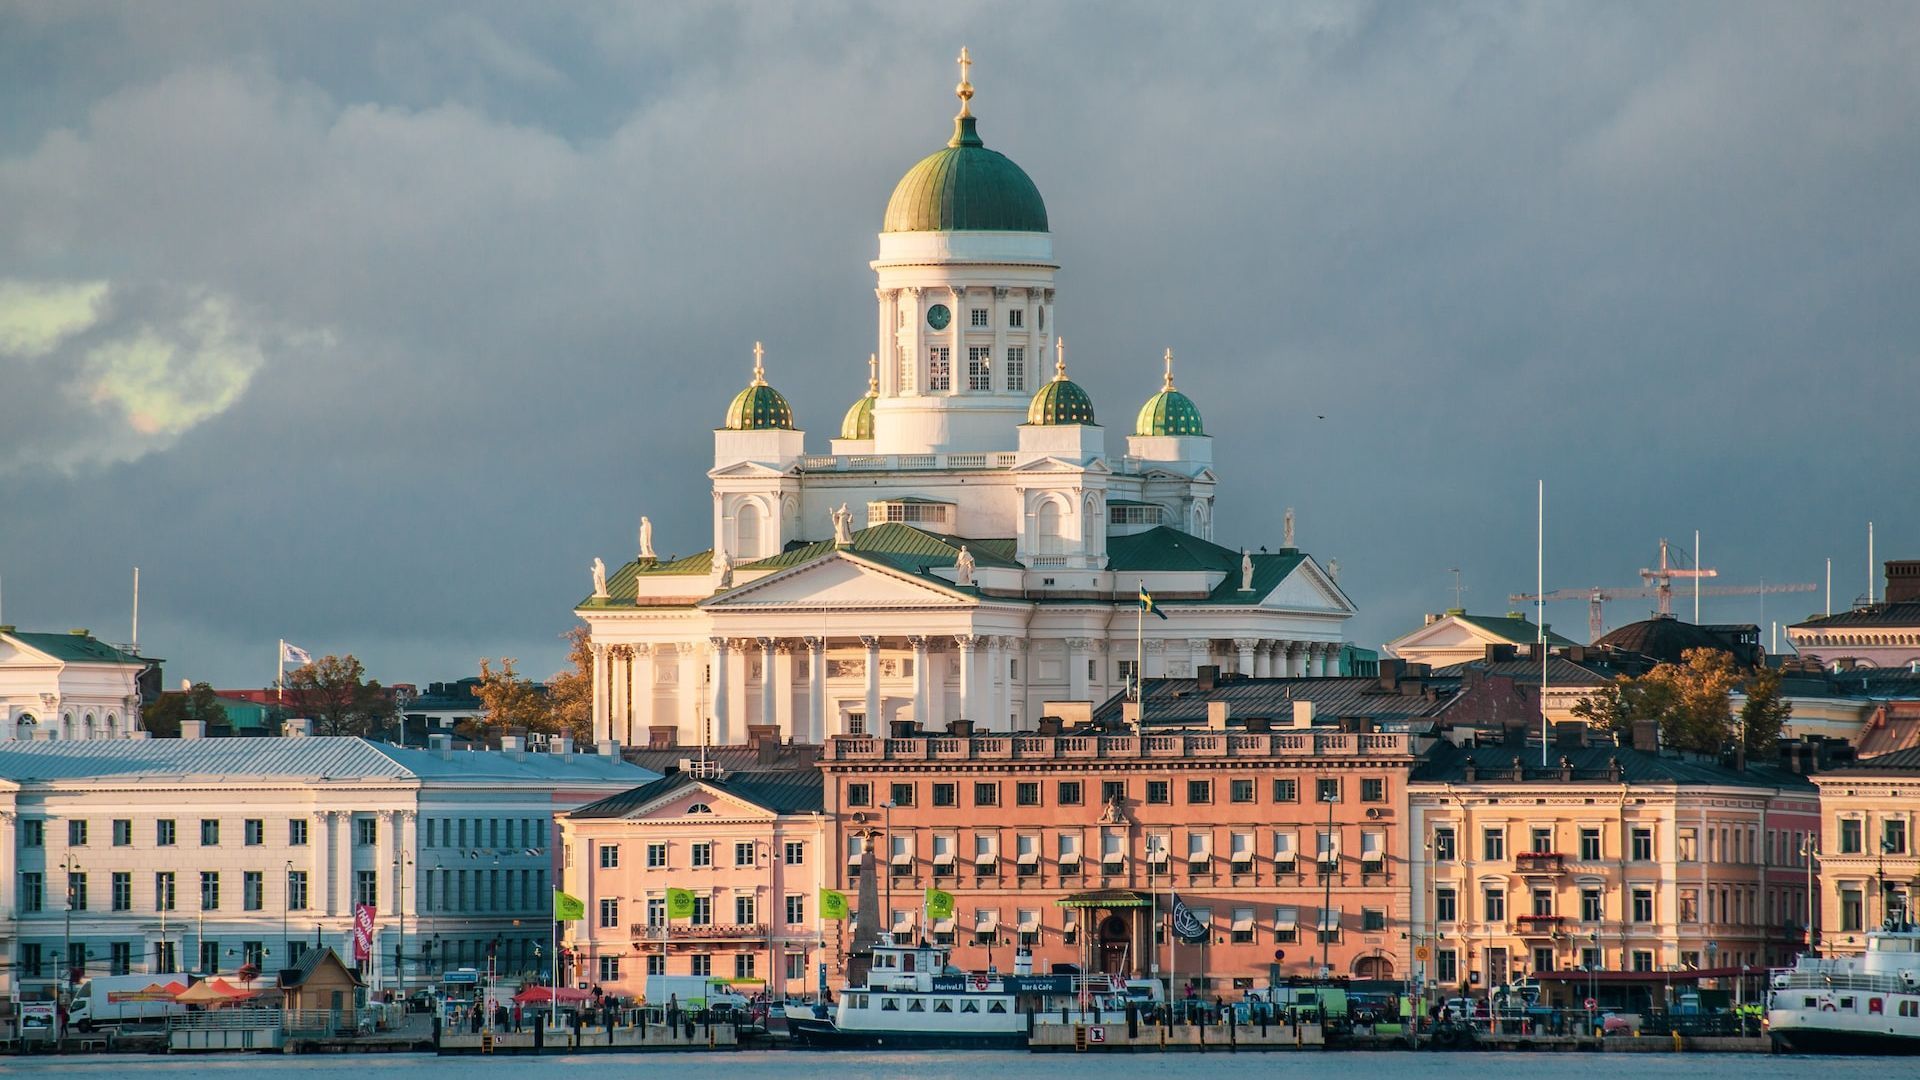 Finland is the Happiest country